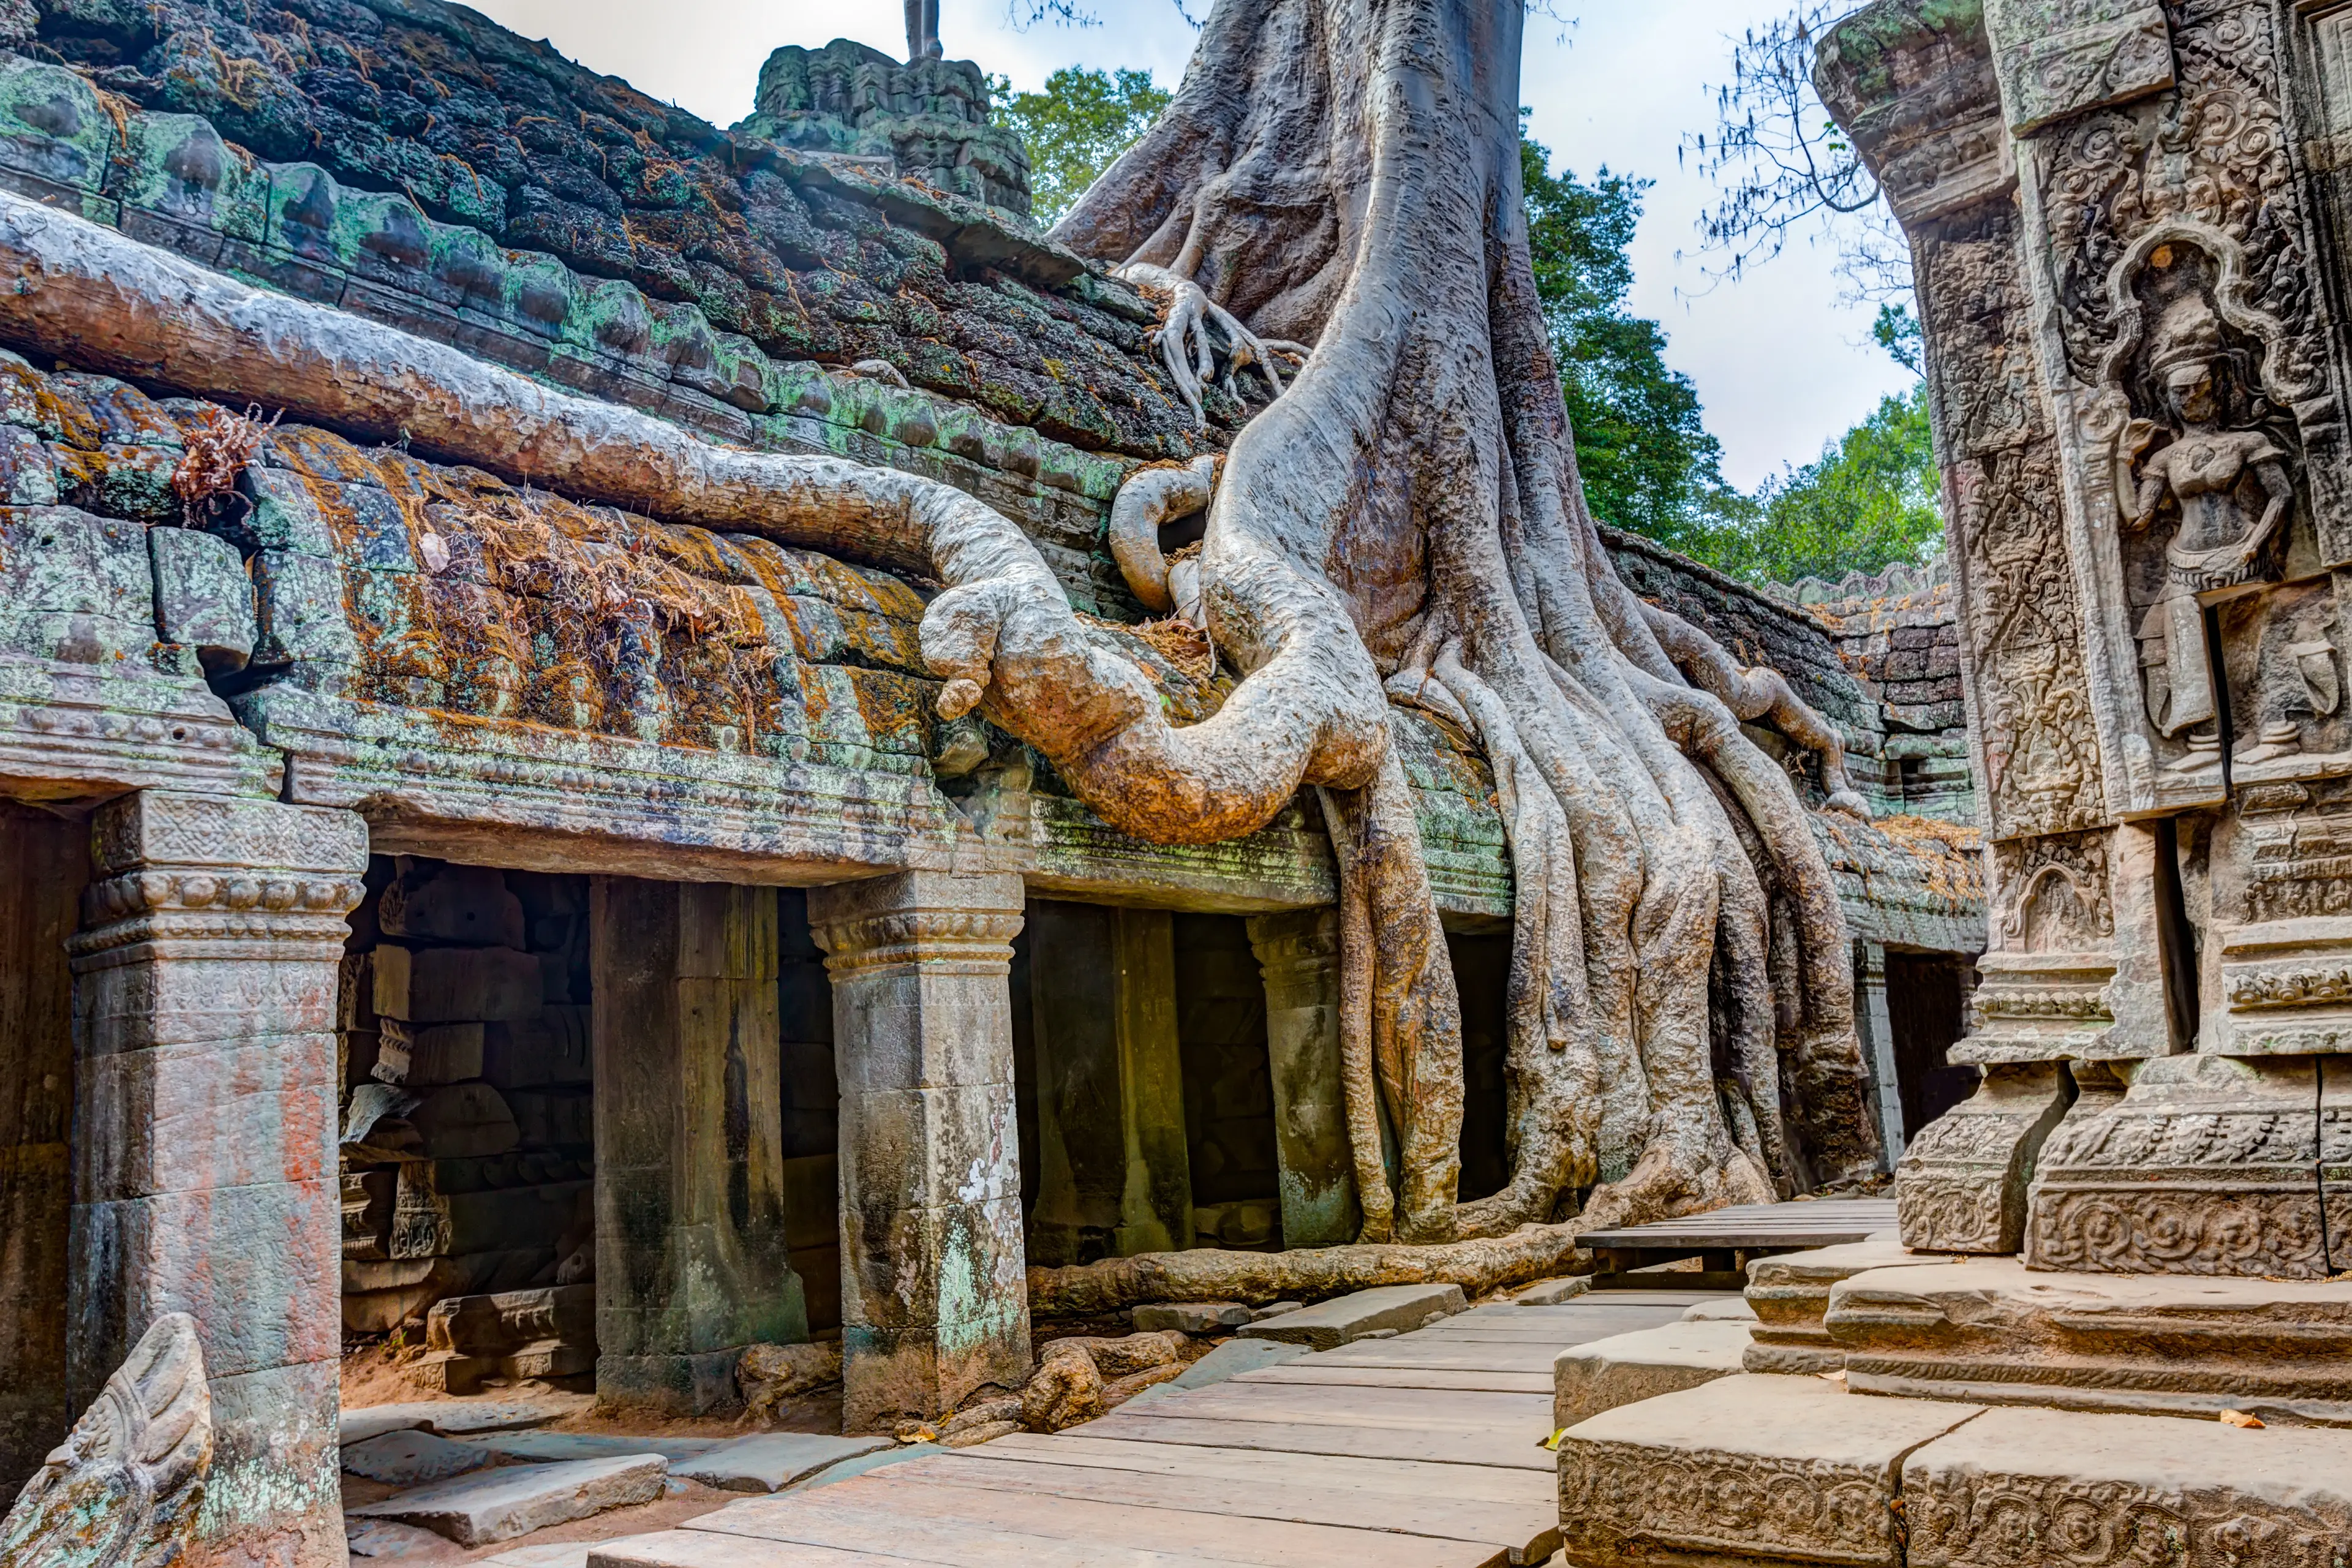 1-Day Local Adventure and Nightlife for Couples at Angkor Wat